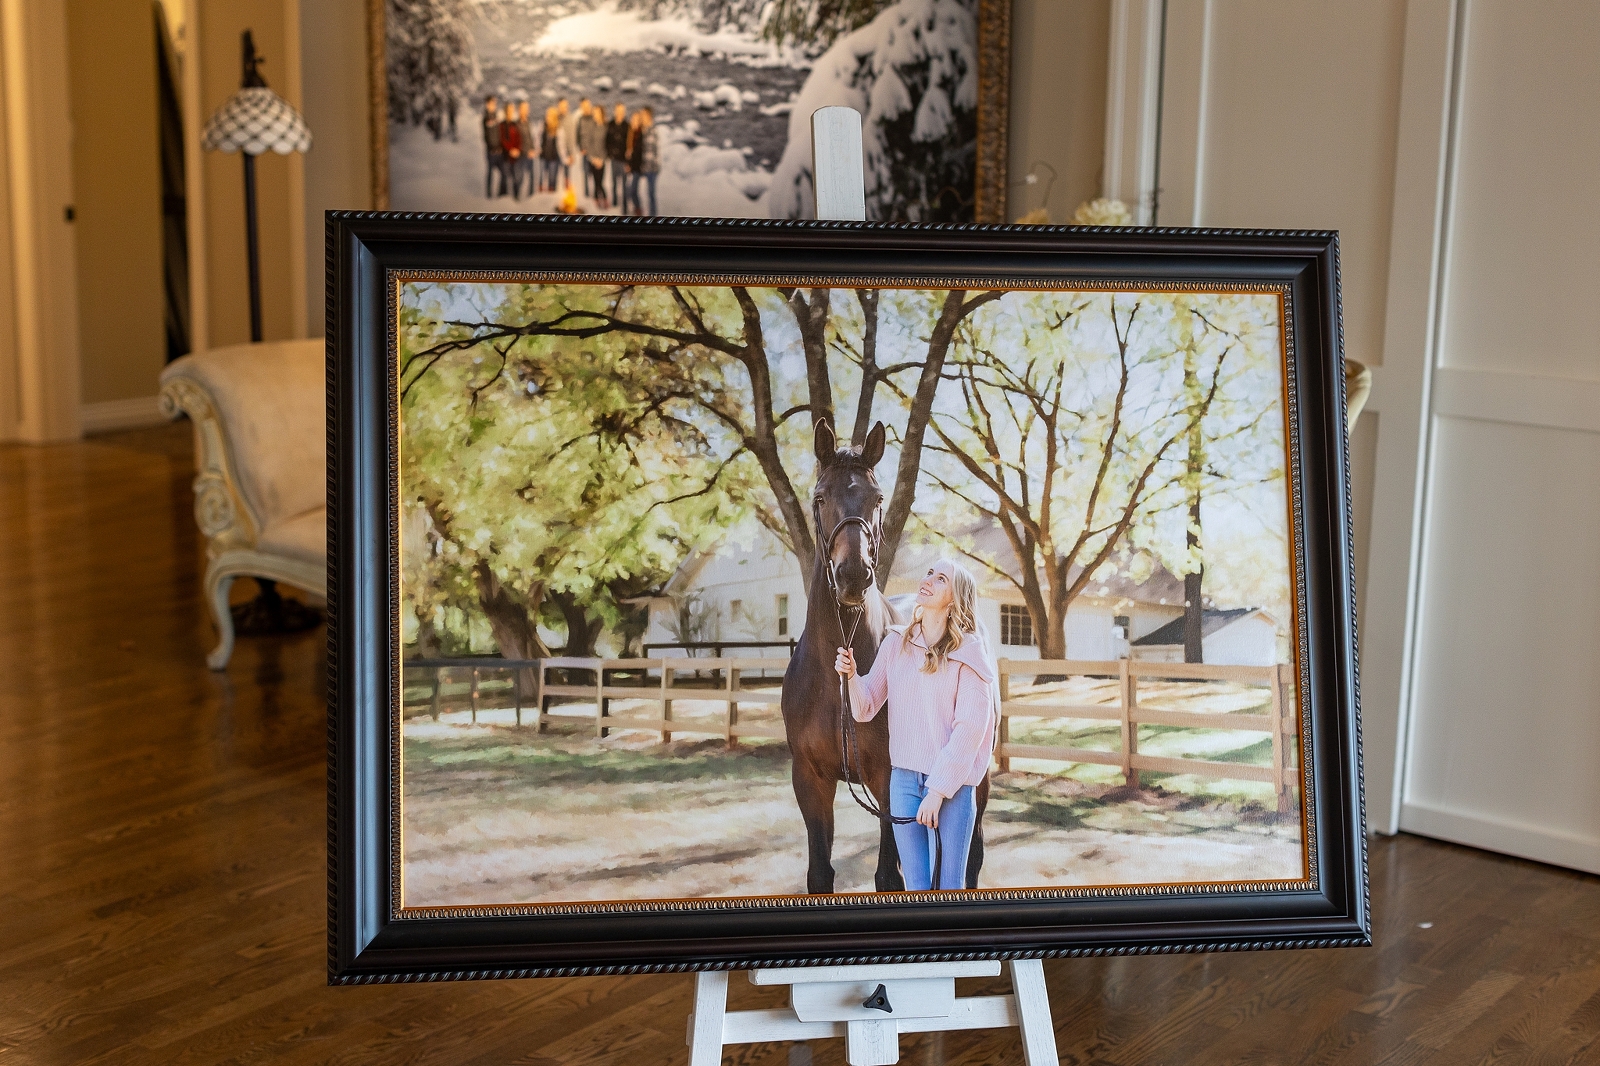 A framed painting of a woman and a horse displayed on an easel in an elegant room.